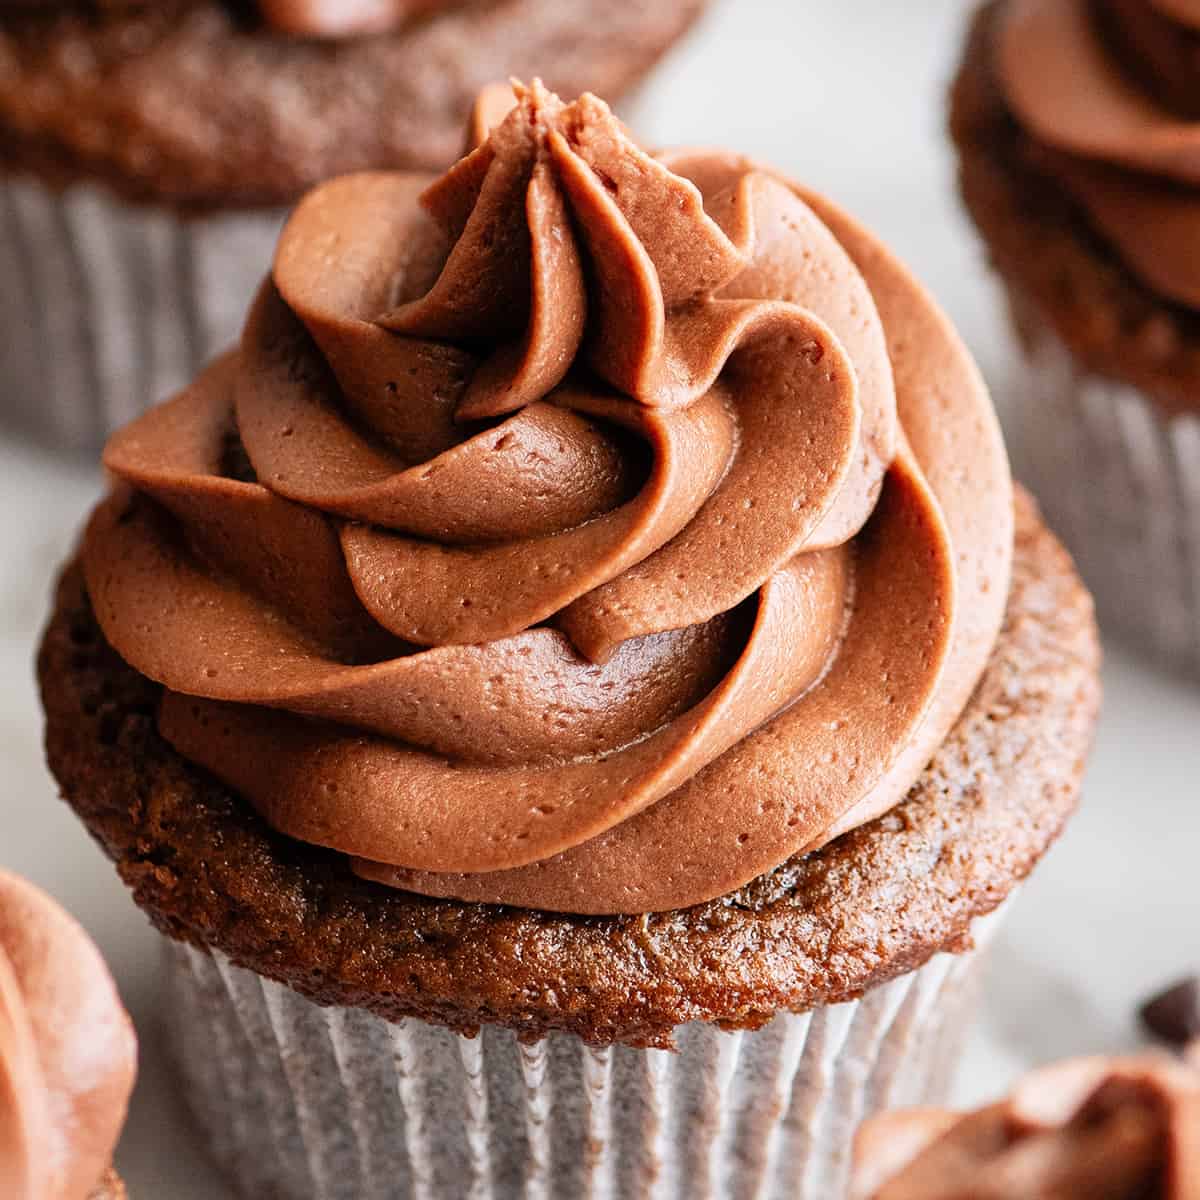 chocolate buttercream frosting piped on top of a chocolate cupcake